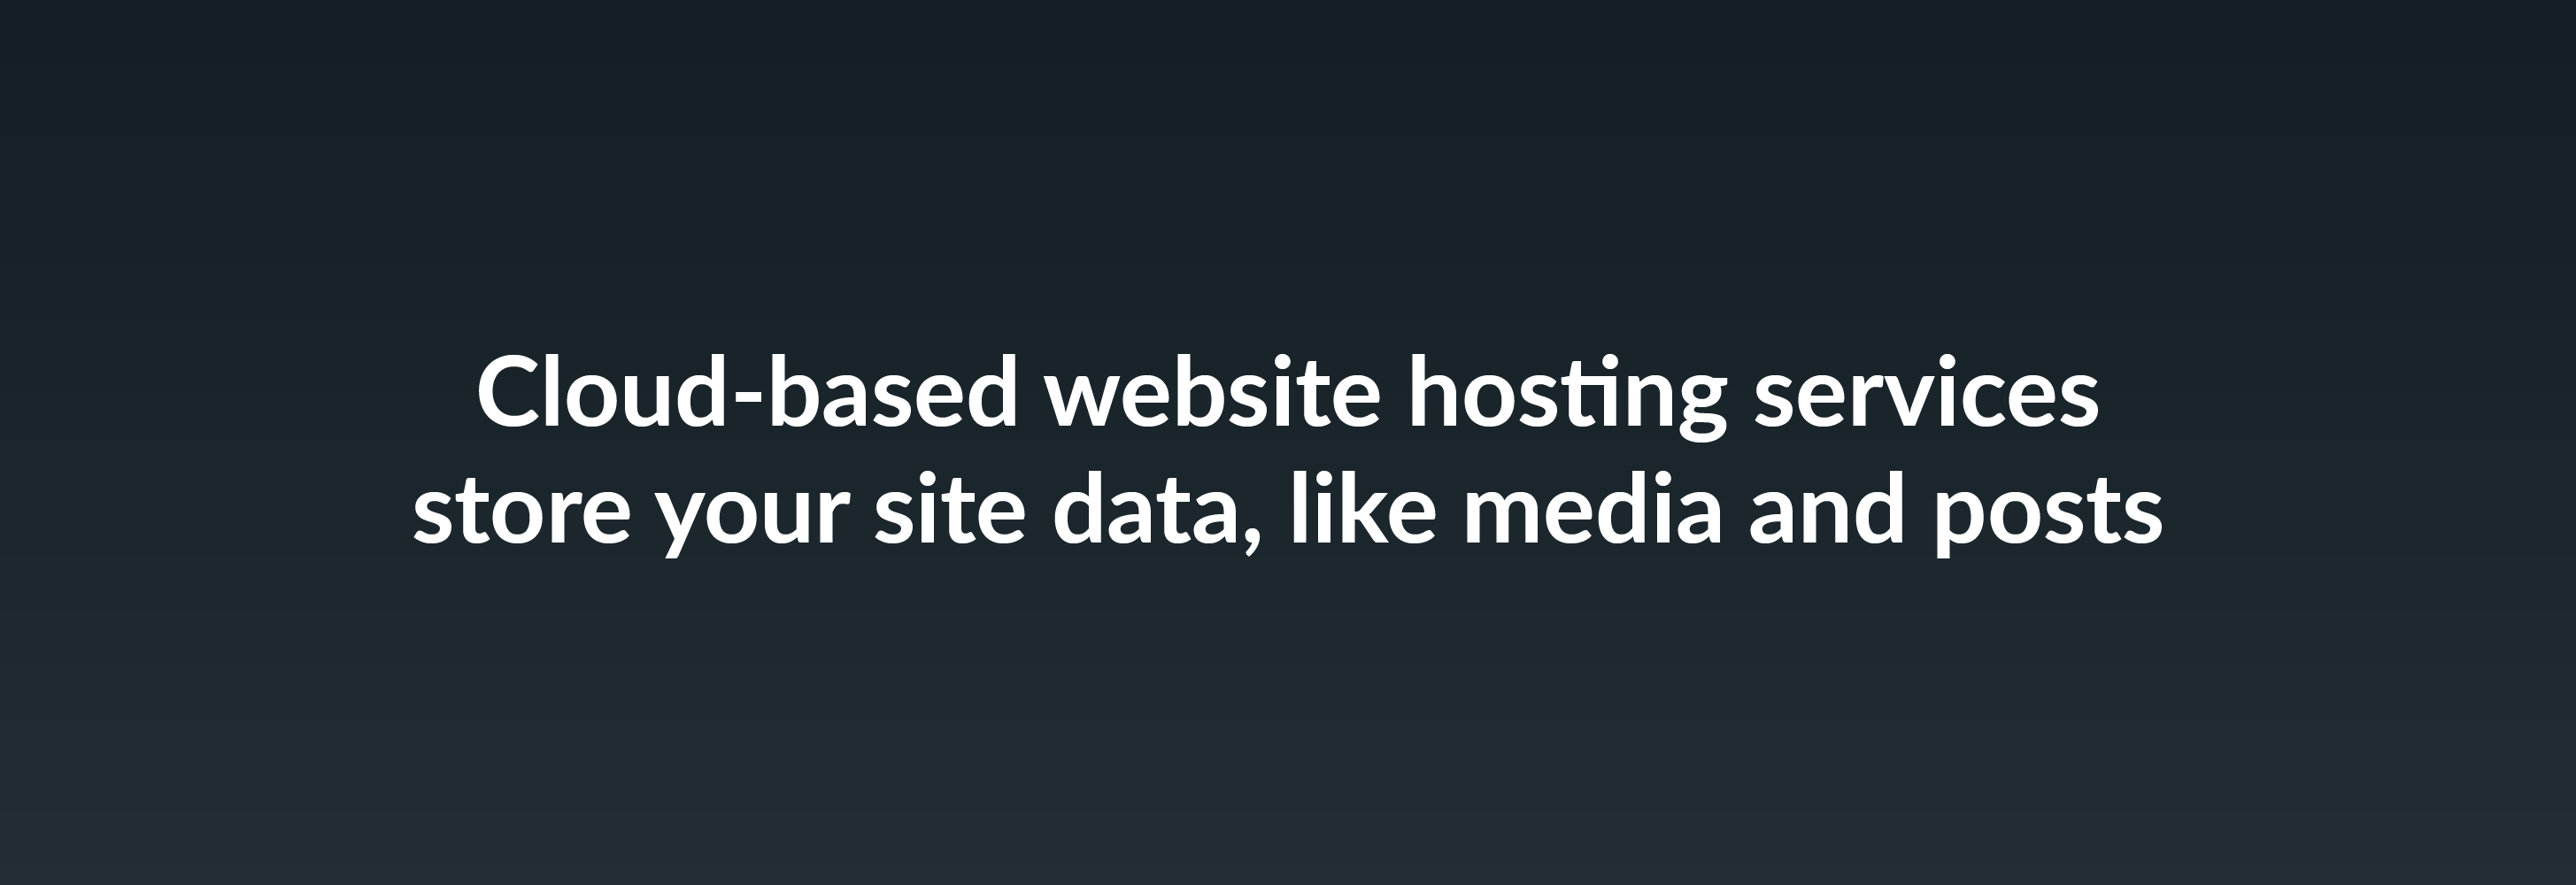 Cloud-based website hosting services store your site data, like media and posts